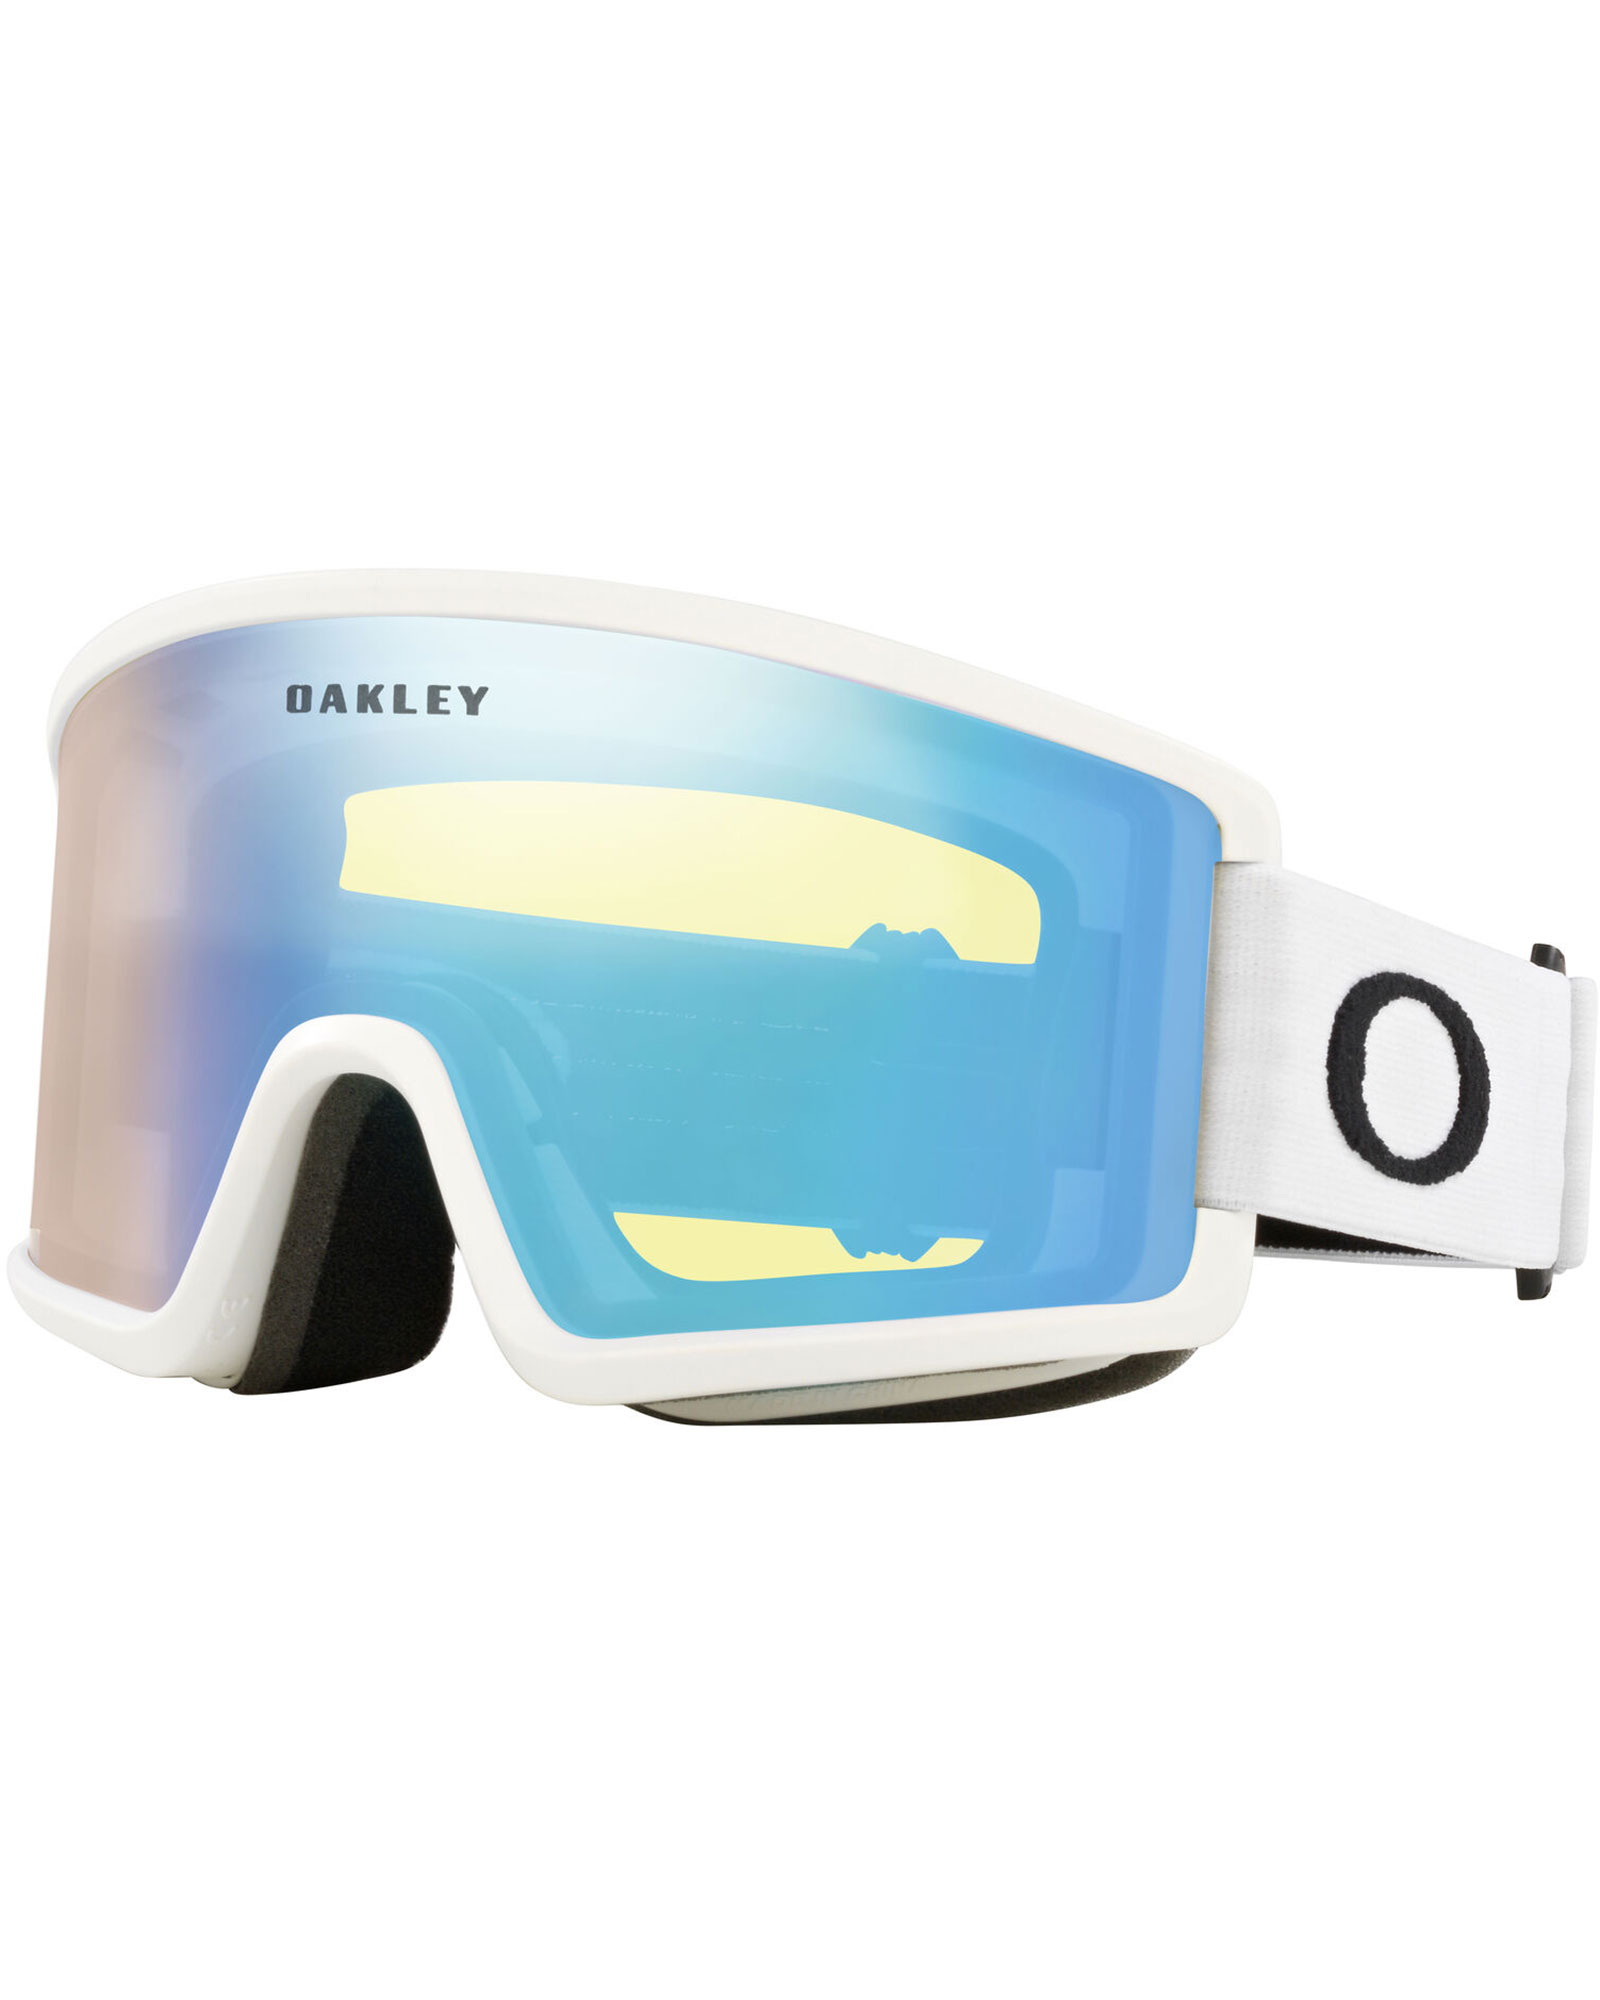 Product image of Oakley Target Line M Matte White / High Intensity Yellow Goggles